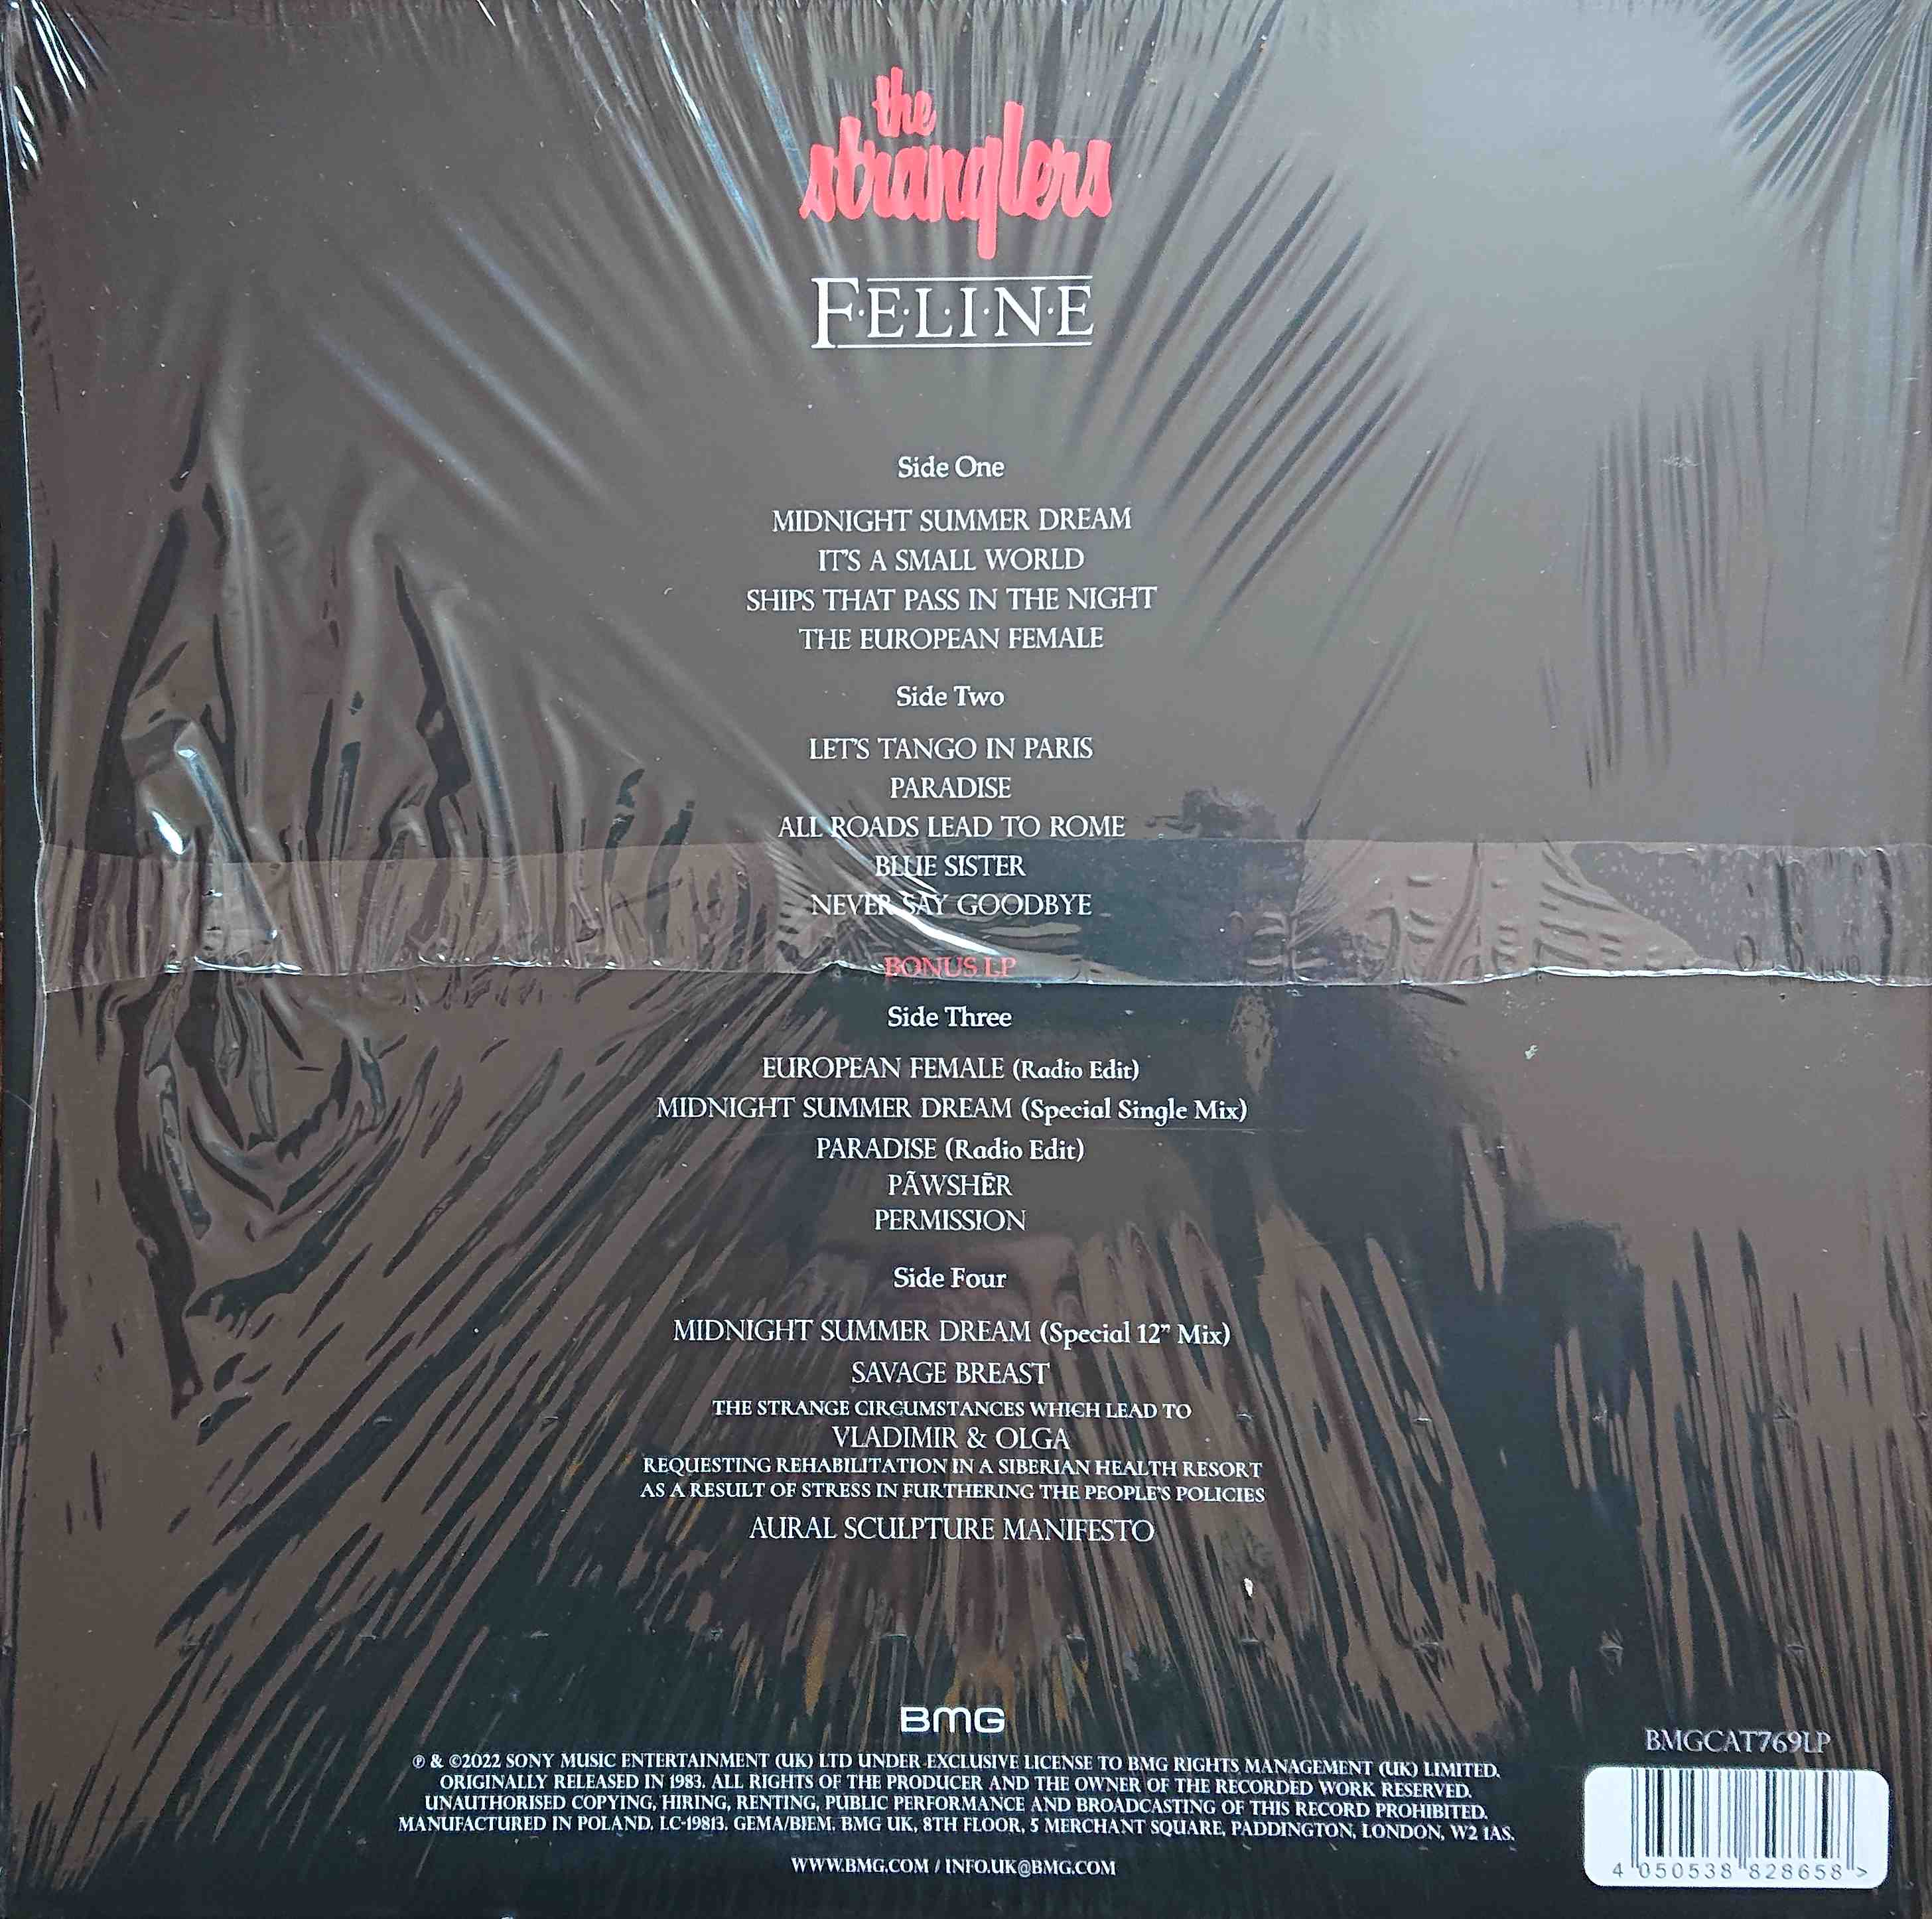 Picture of MBG CAT 769 LP Feline (40th anniversary edition) by artist The Stranglers from The Stranglers